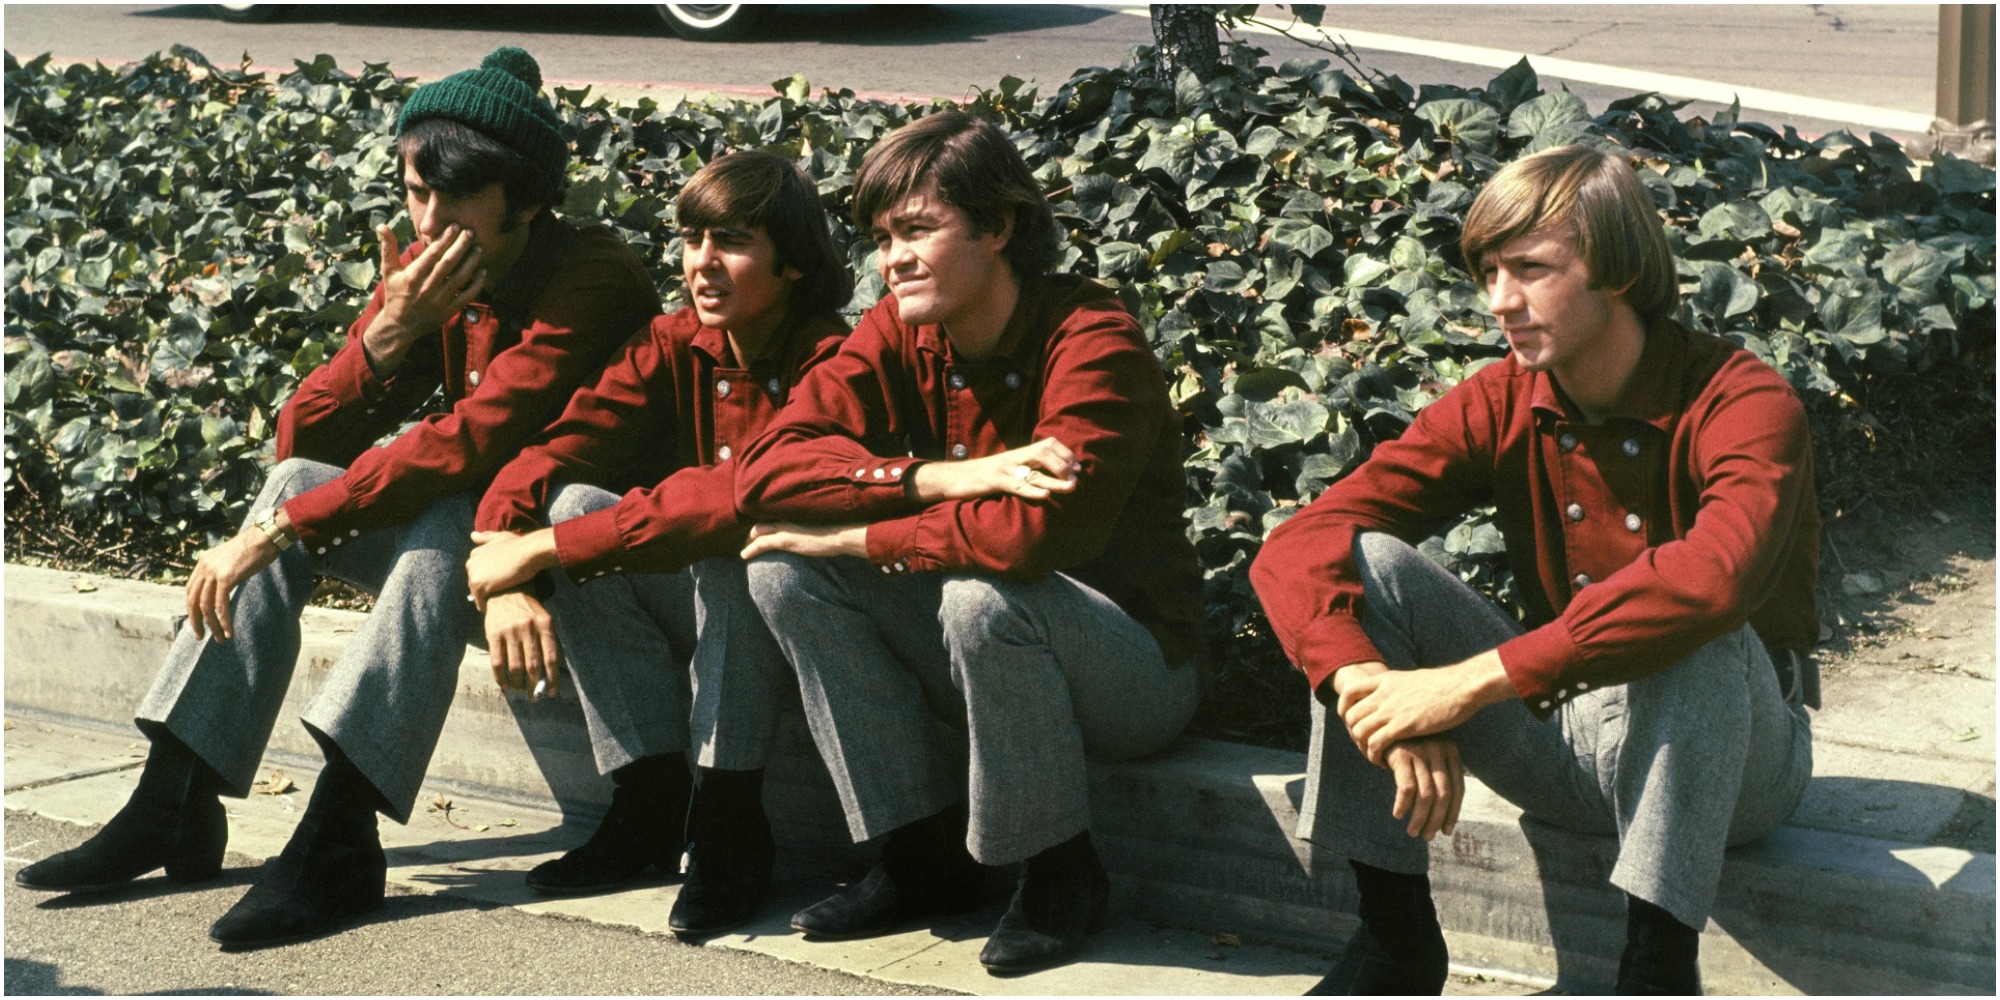 The Monkees cast sit on a curb in a scene of the series.